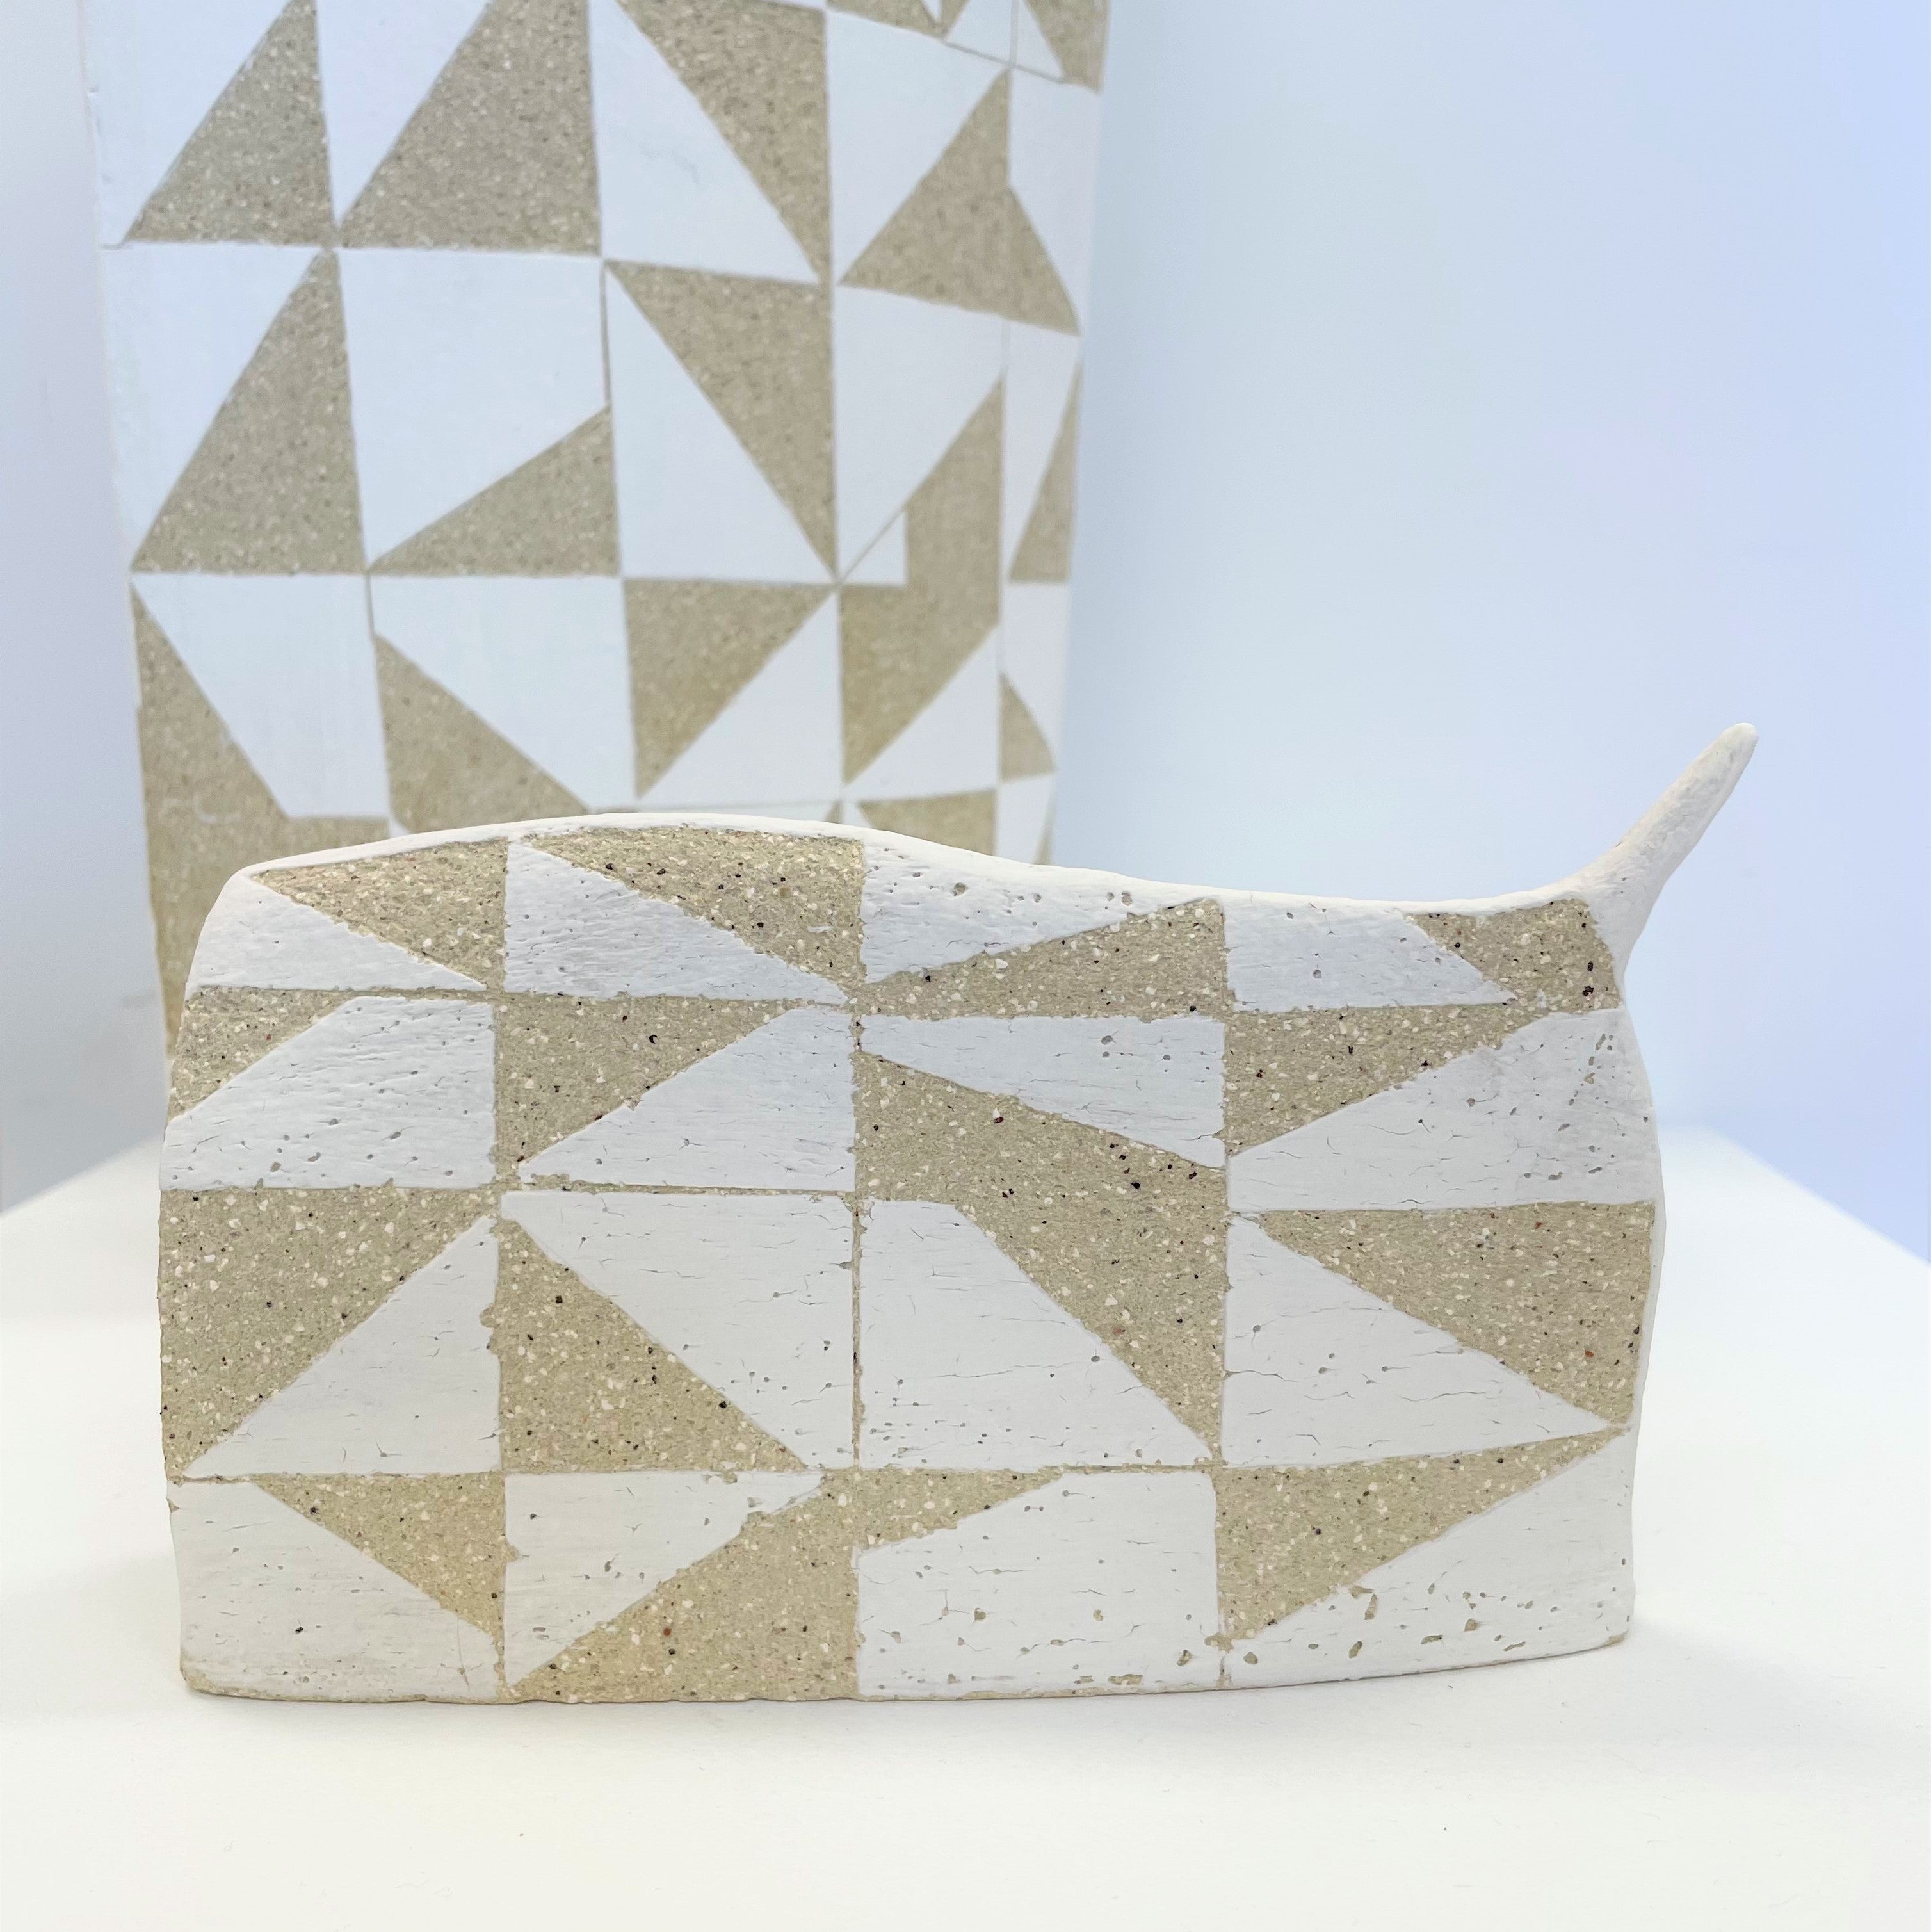 Ceramic works Tall Mountain and Small Mountain by Lynette Hirst. White geometric shapes feature over the surface of the work in white.